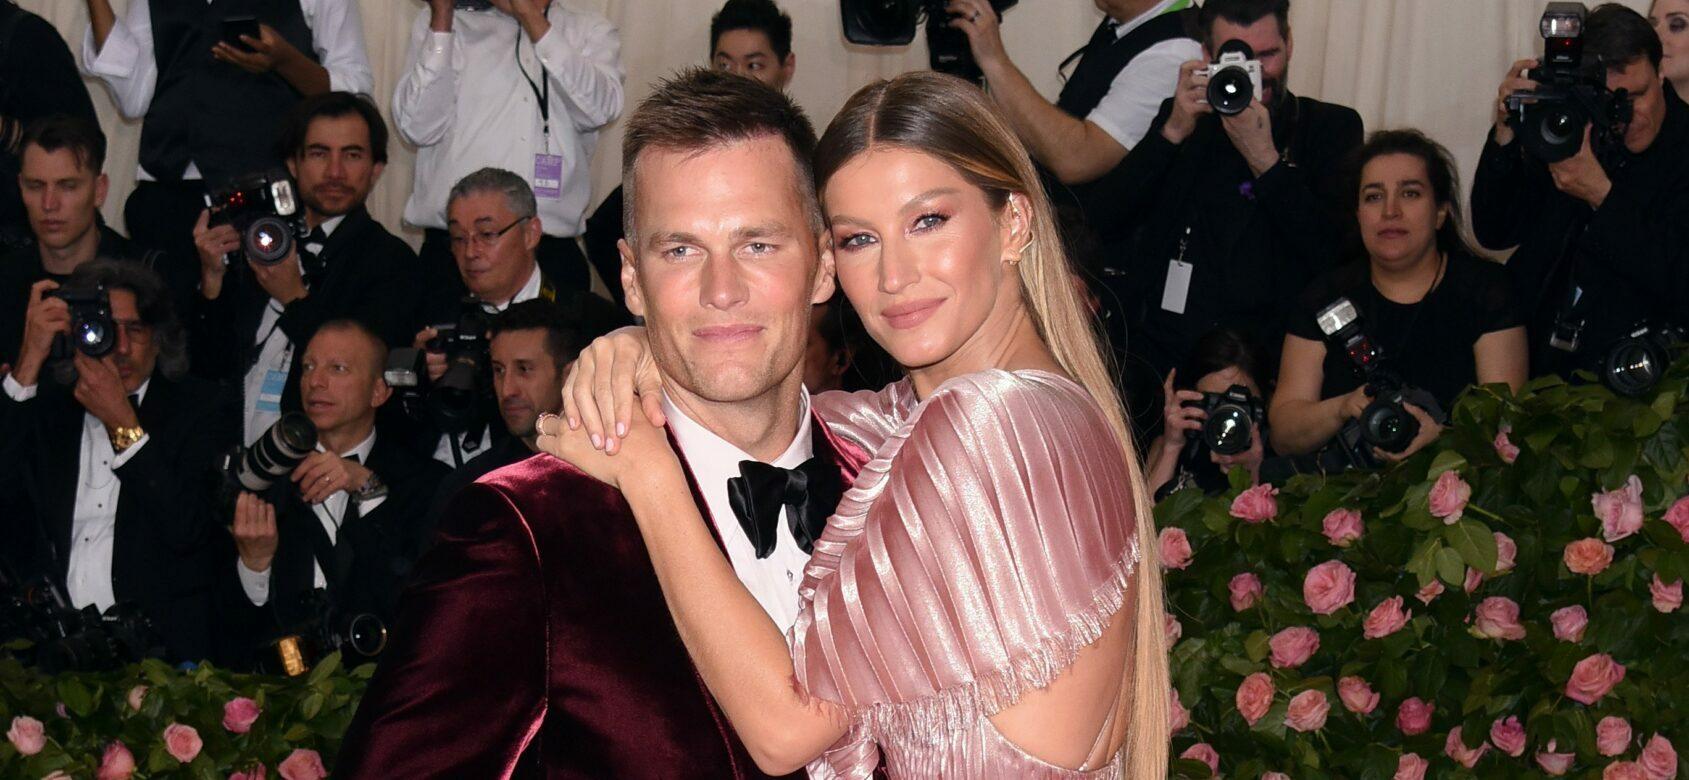 Tom Brady Shares Cryptic Quote On ‘Betrayal’ & ‘False Friends’ After Gisele’s Candid Interview